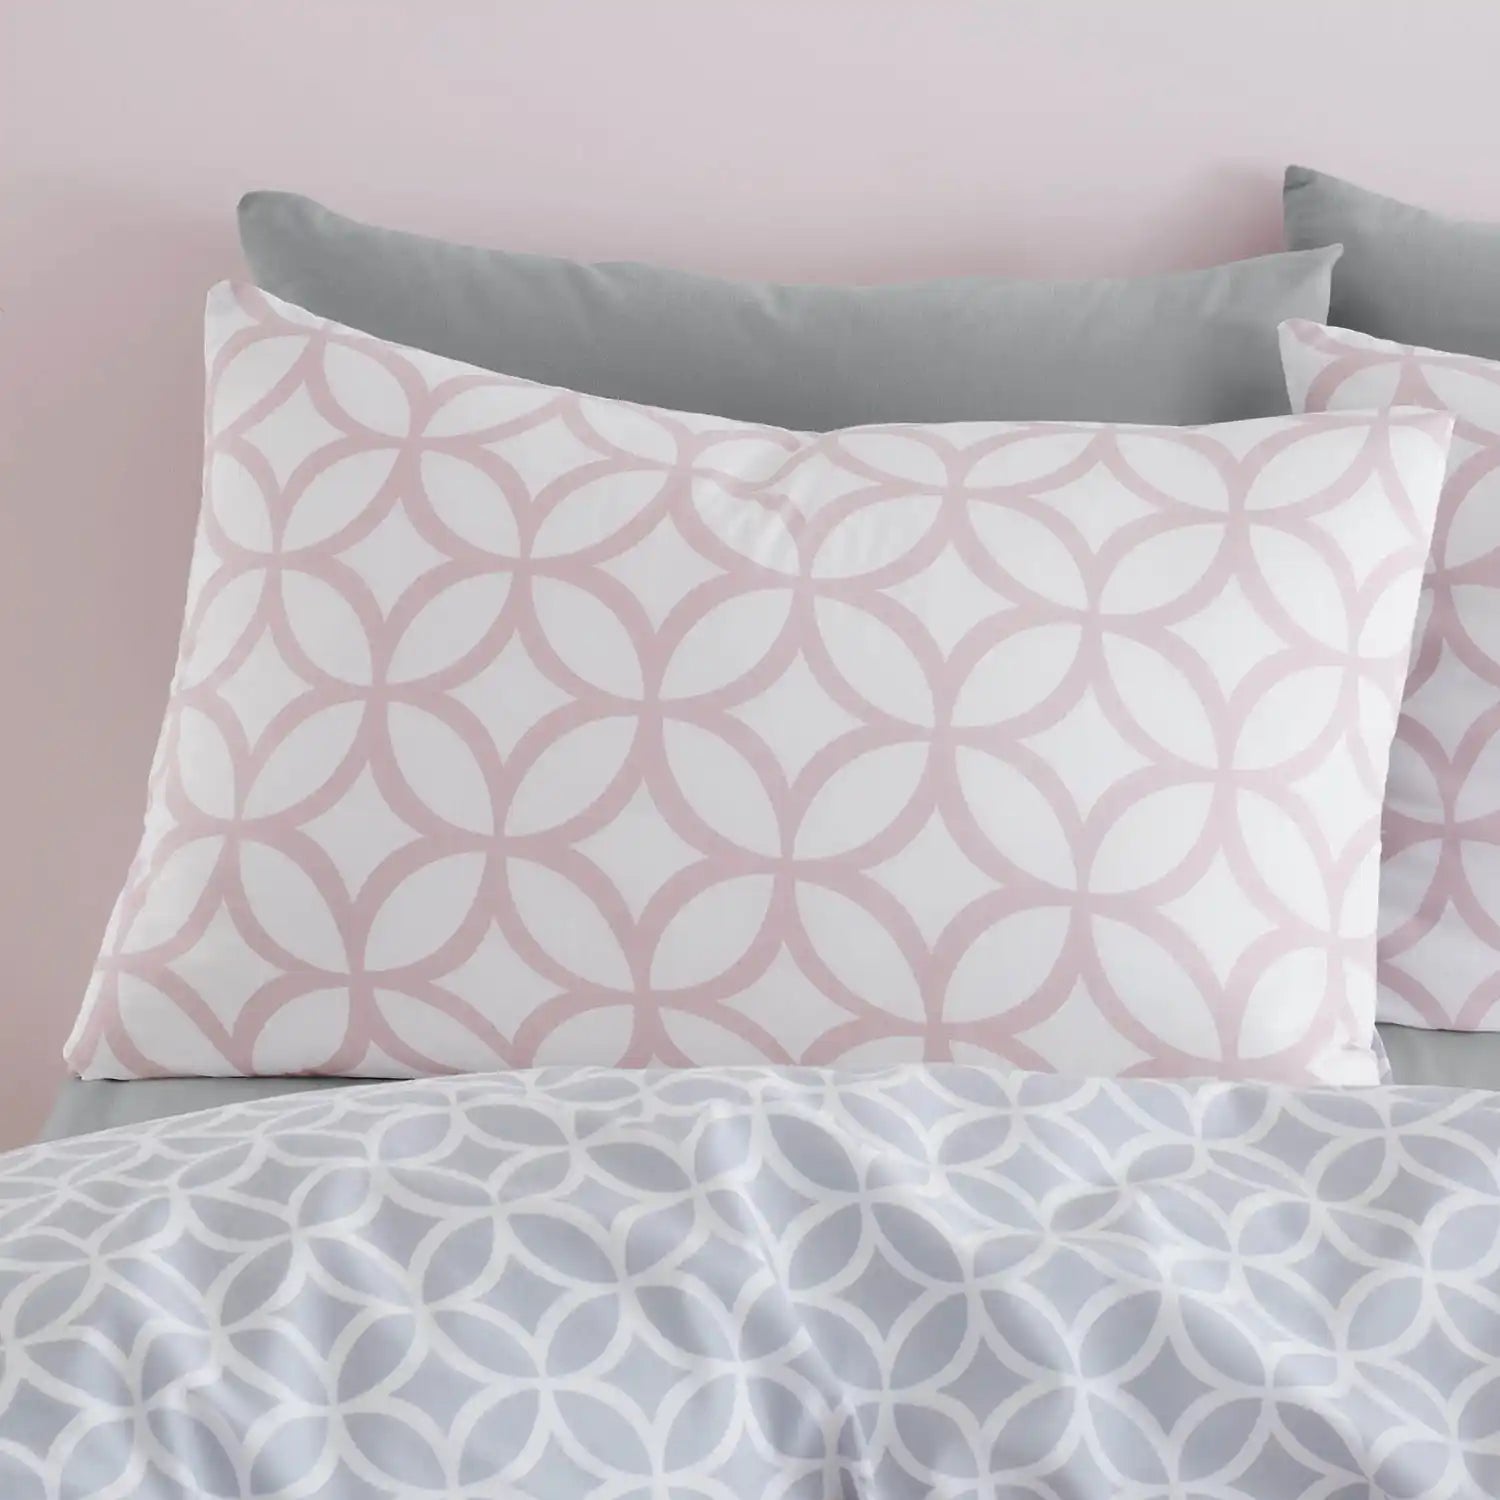  Catherine Lansfield Geo Trellis Duvet Cover Set with Pillowcases - Pink 3 Shaws Department Stores